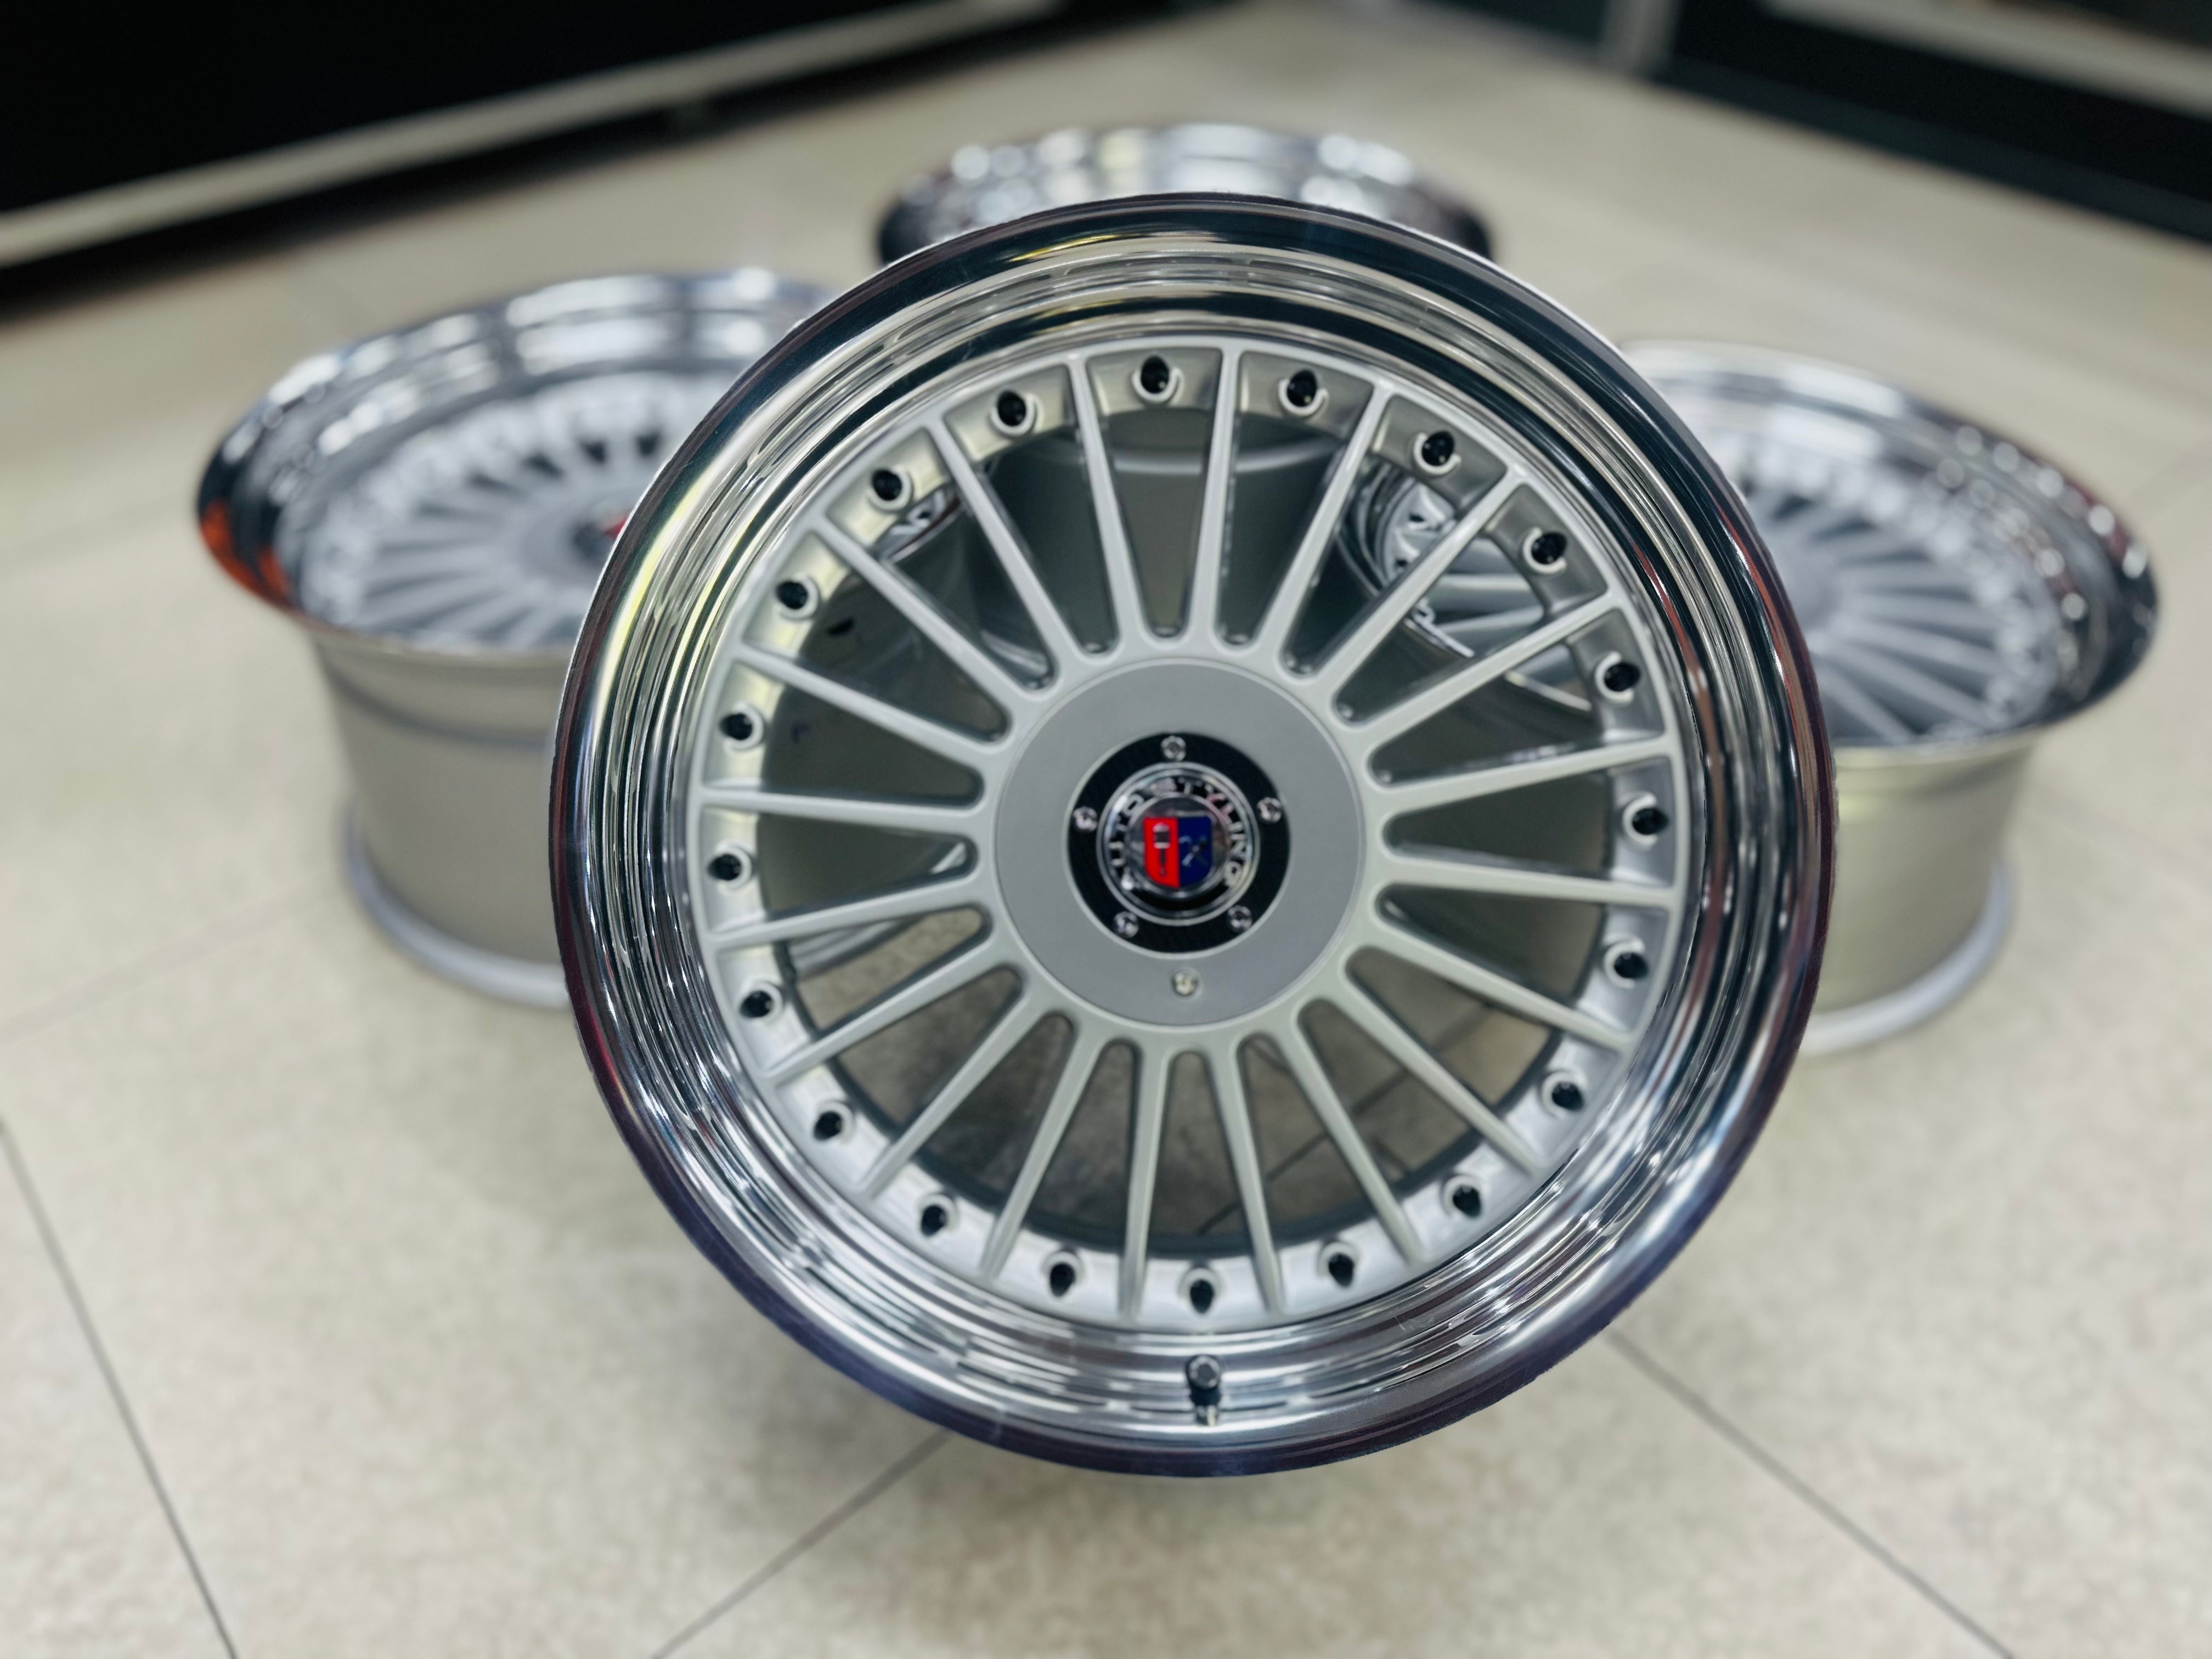 18” AS ALPINA 5X112 & 5X120 wheels with high polished dishes